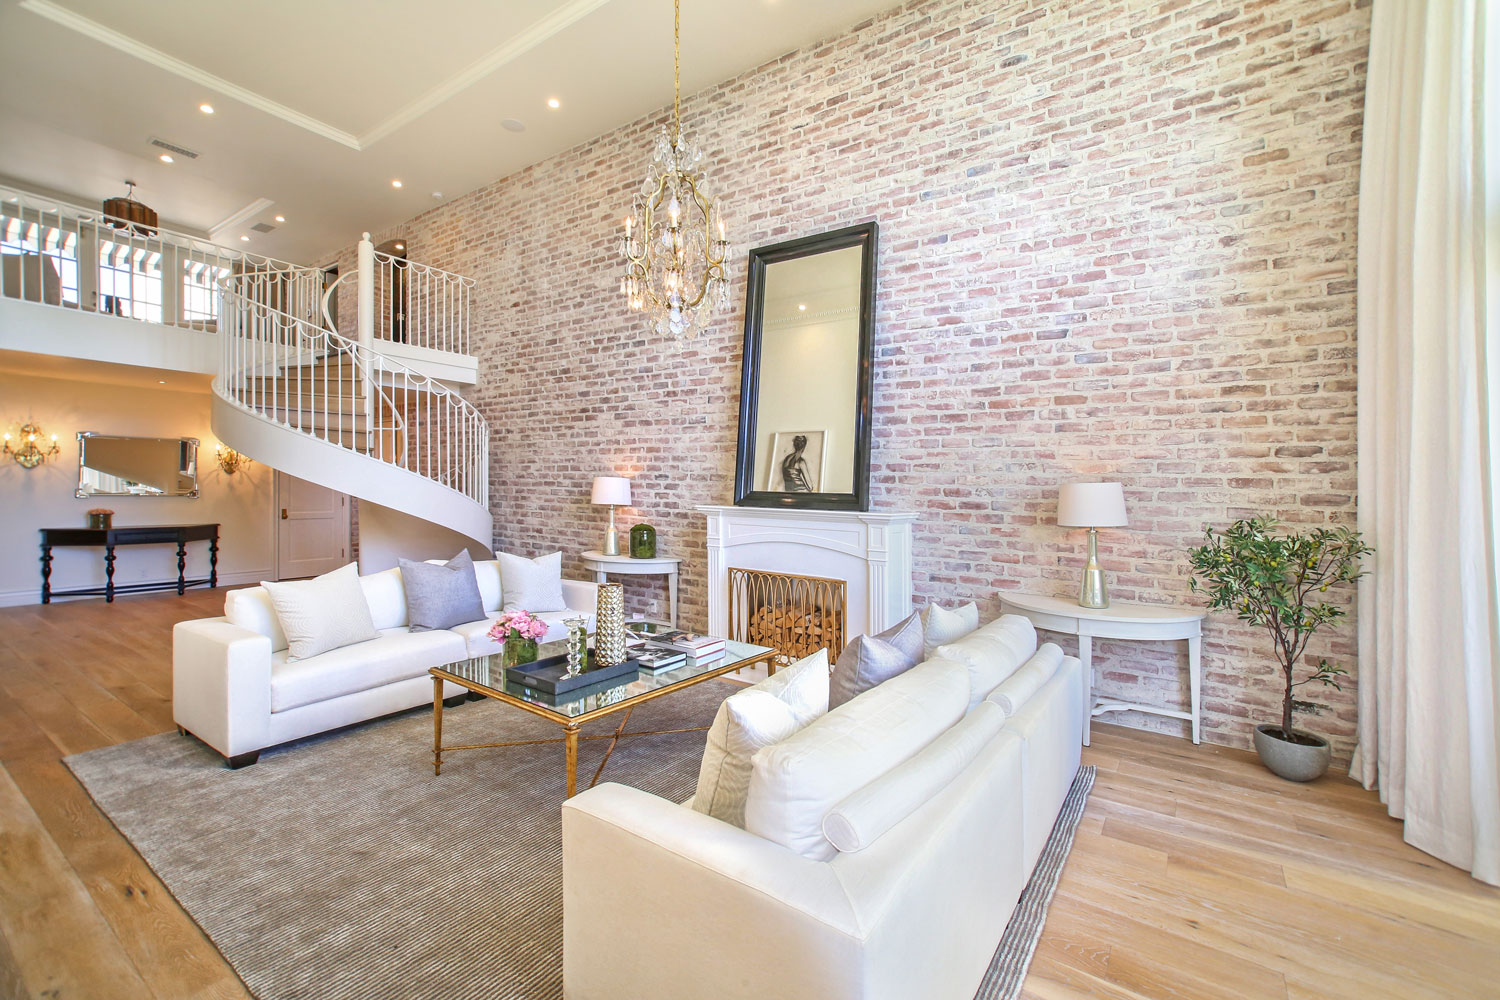 01-exposed-brick-walls-spiral-staircase-wide-plank-floors-gary-drake-general-contractor.jpg